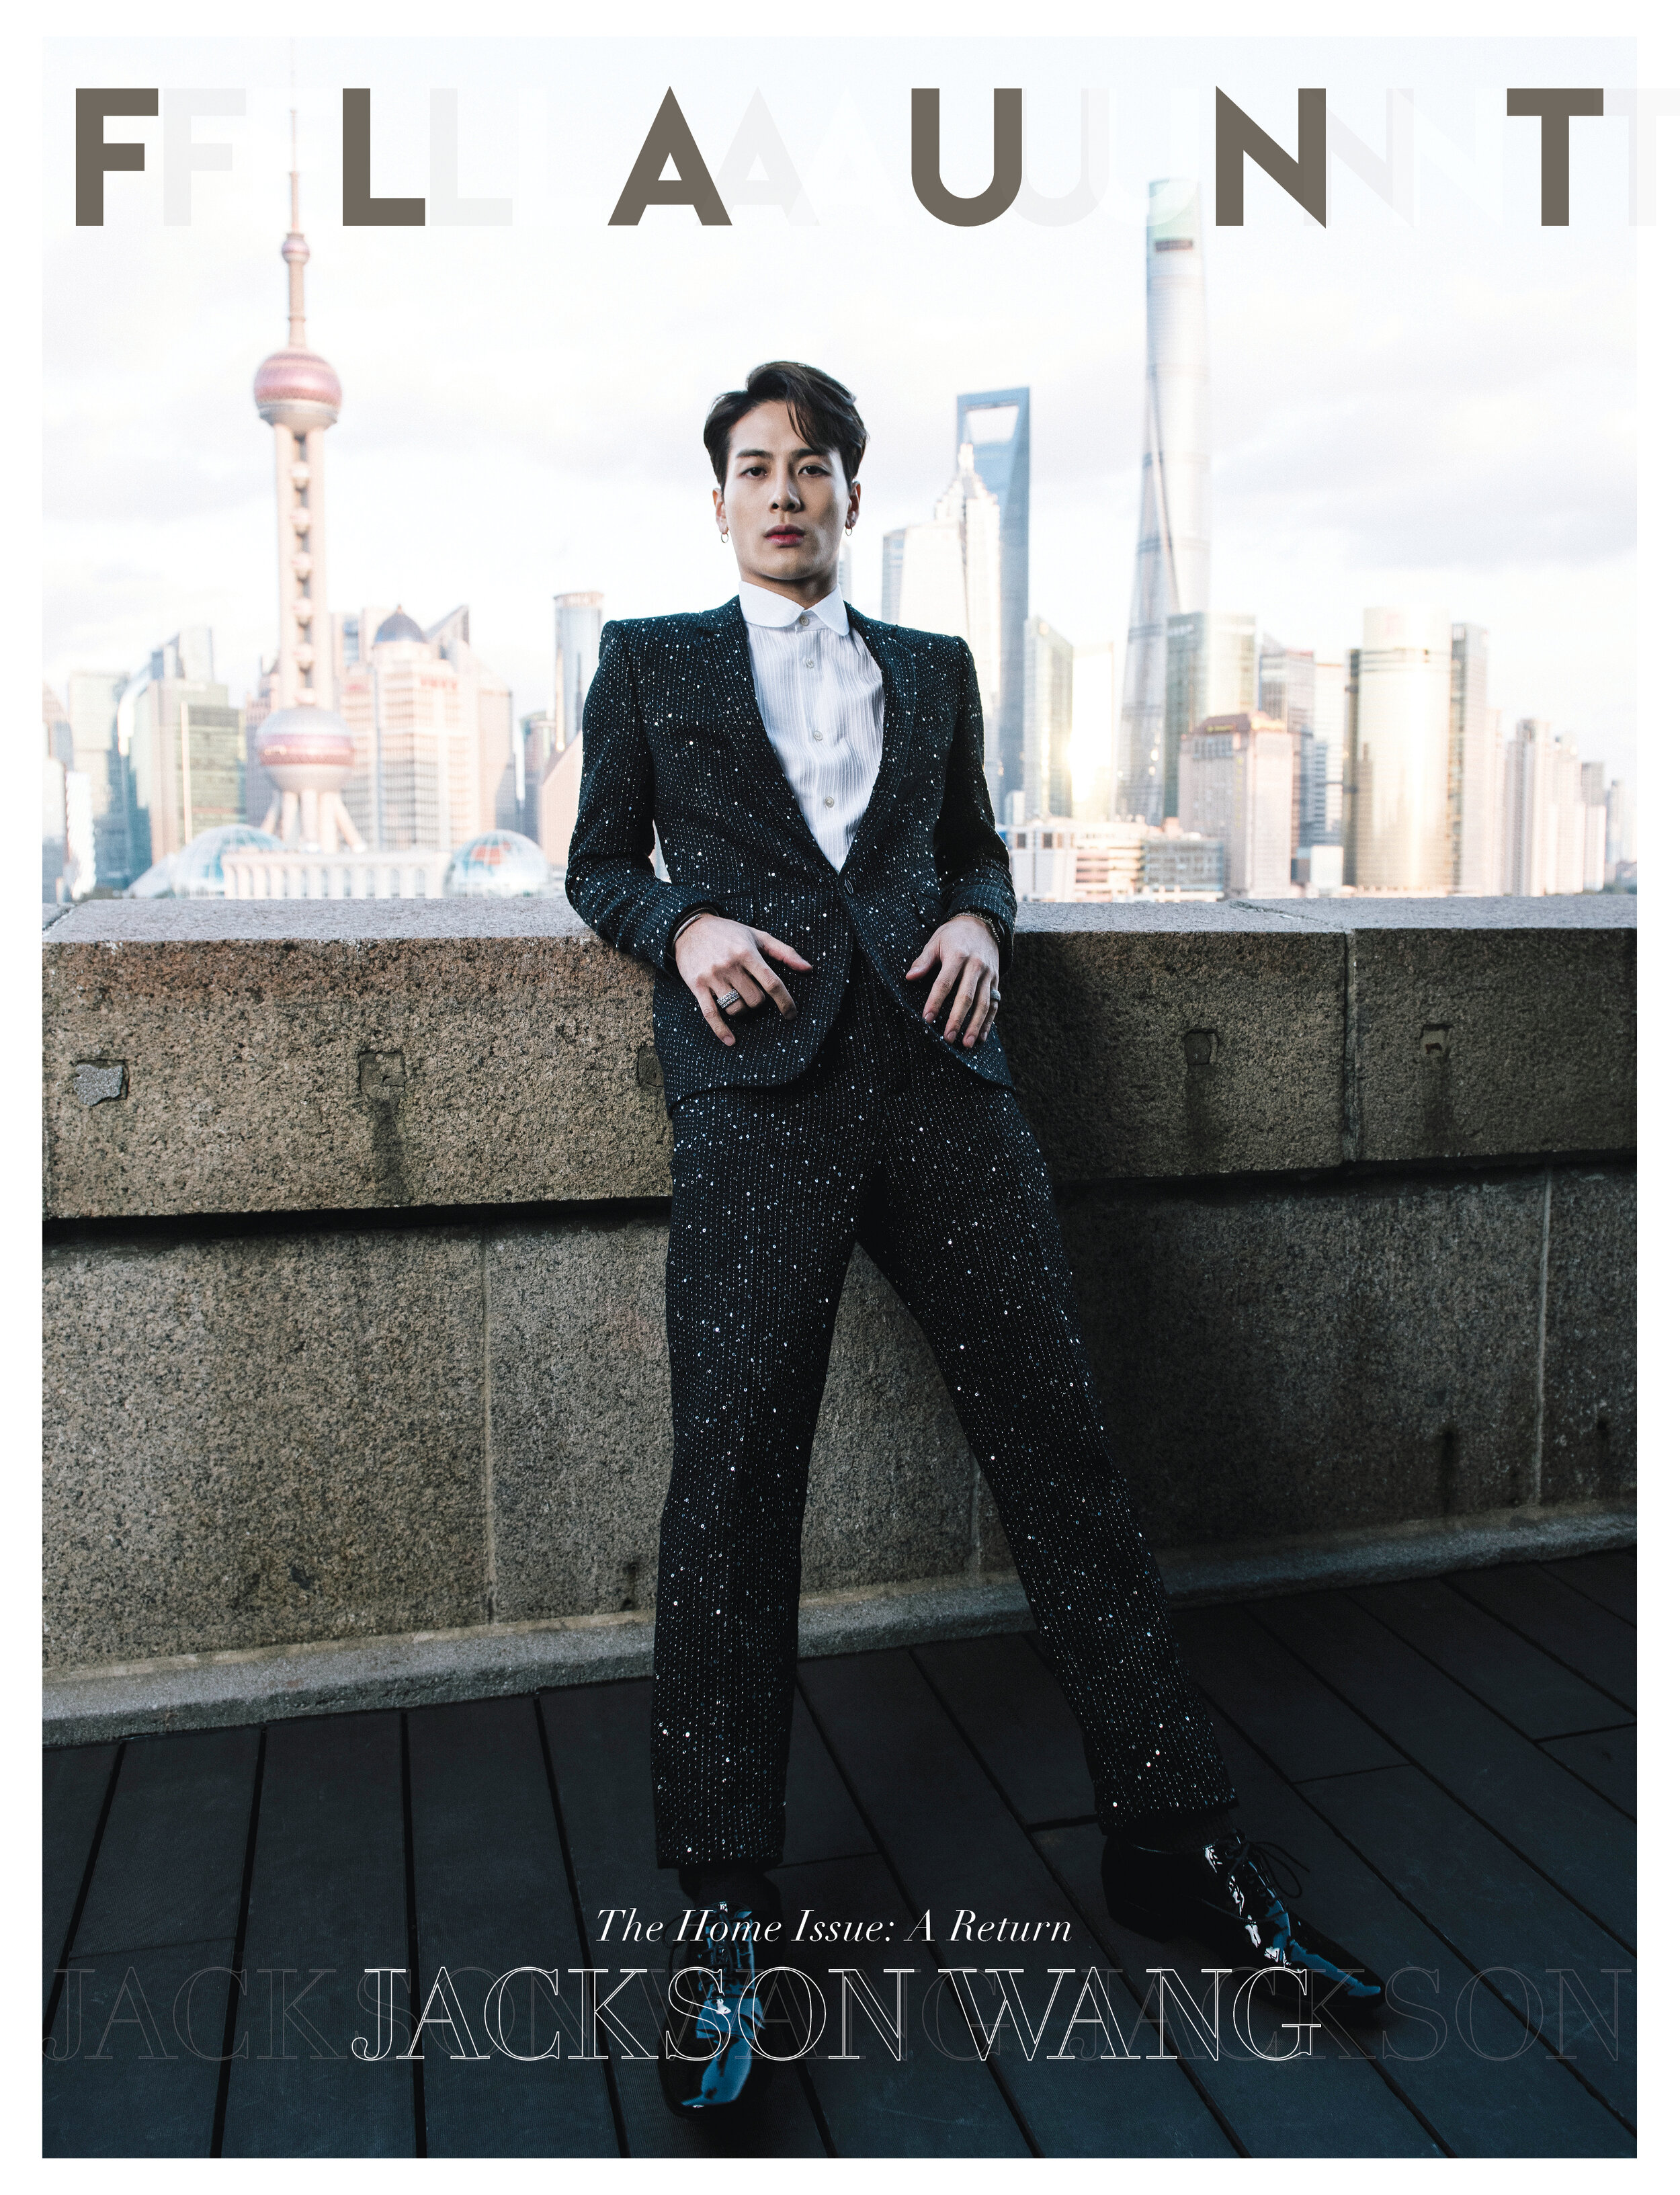 Jackson Wang Flaunt Magazine Cover 168 The Home Issue3.jpg